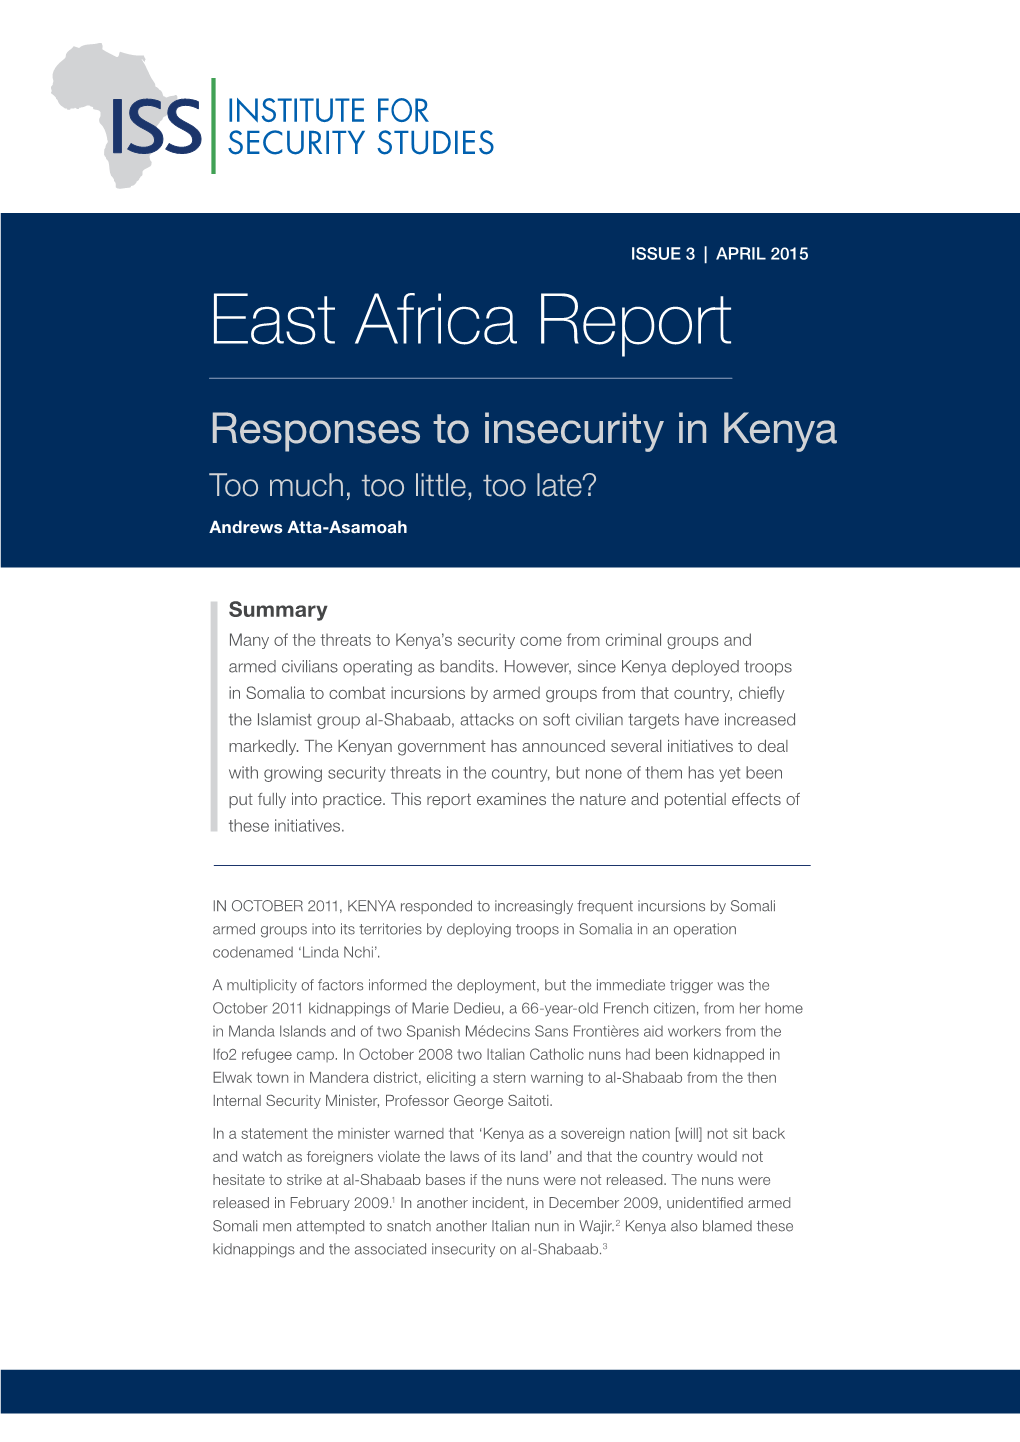 East Africa Report